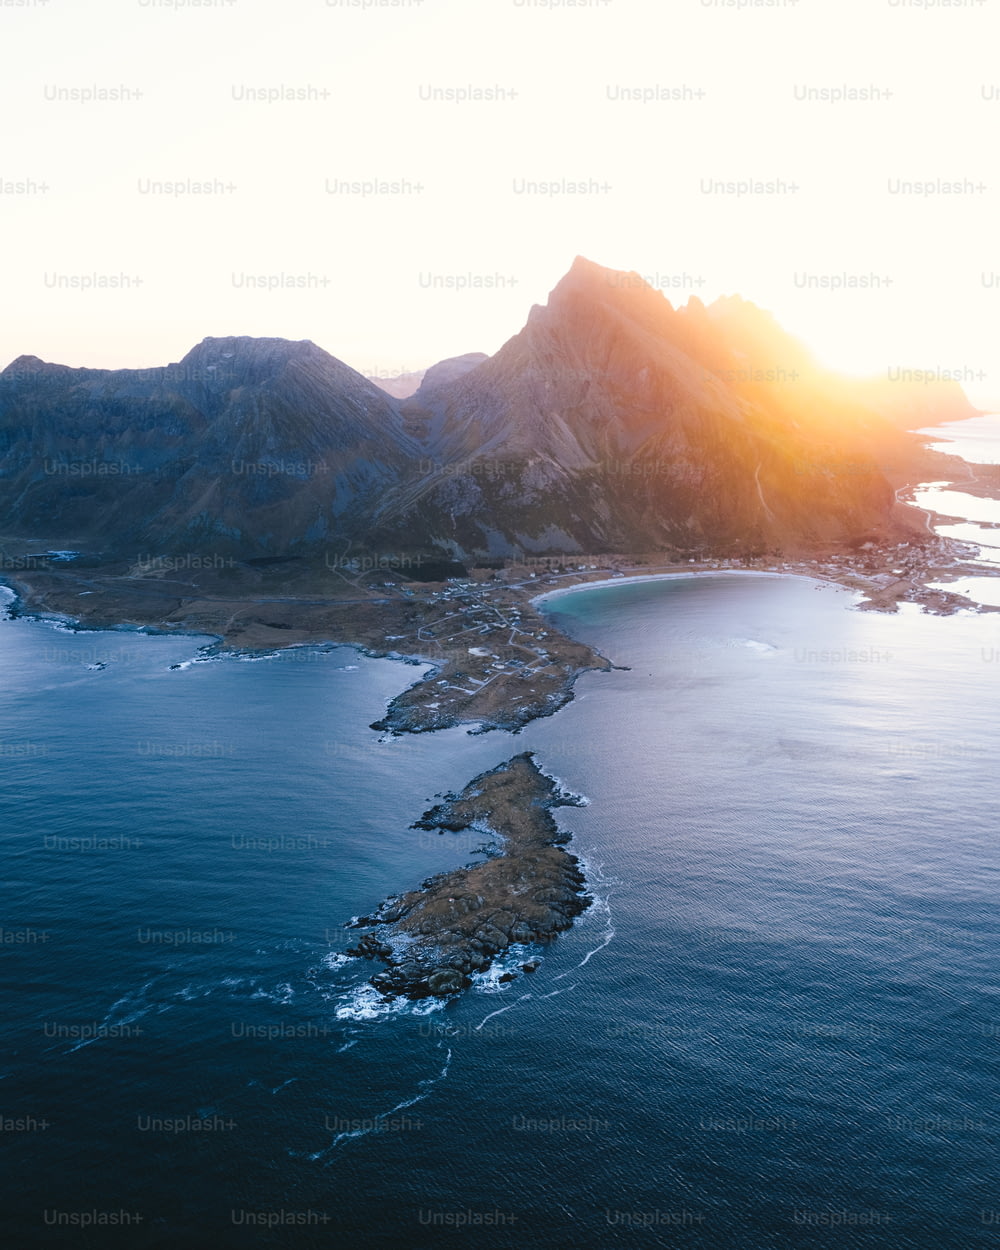 a body of water with islands and mountains in the background